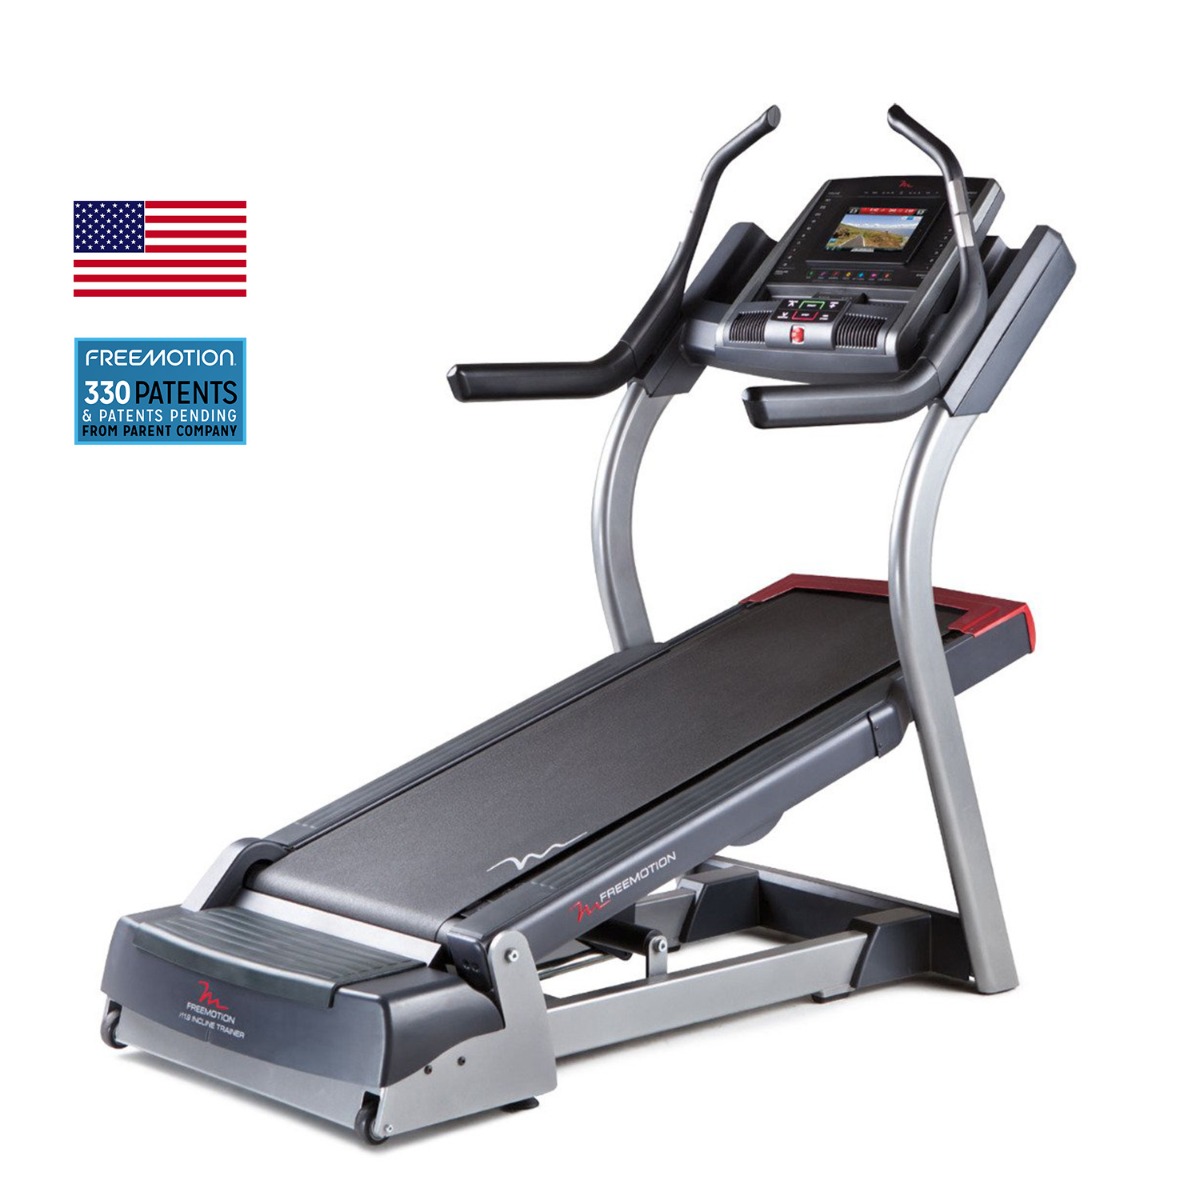  I11.9 INCLINE TREADMILL TRAINER - AVAILABLE IN ST JOHNS